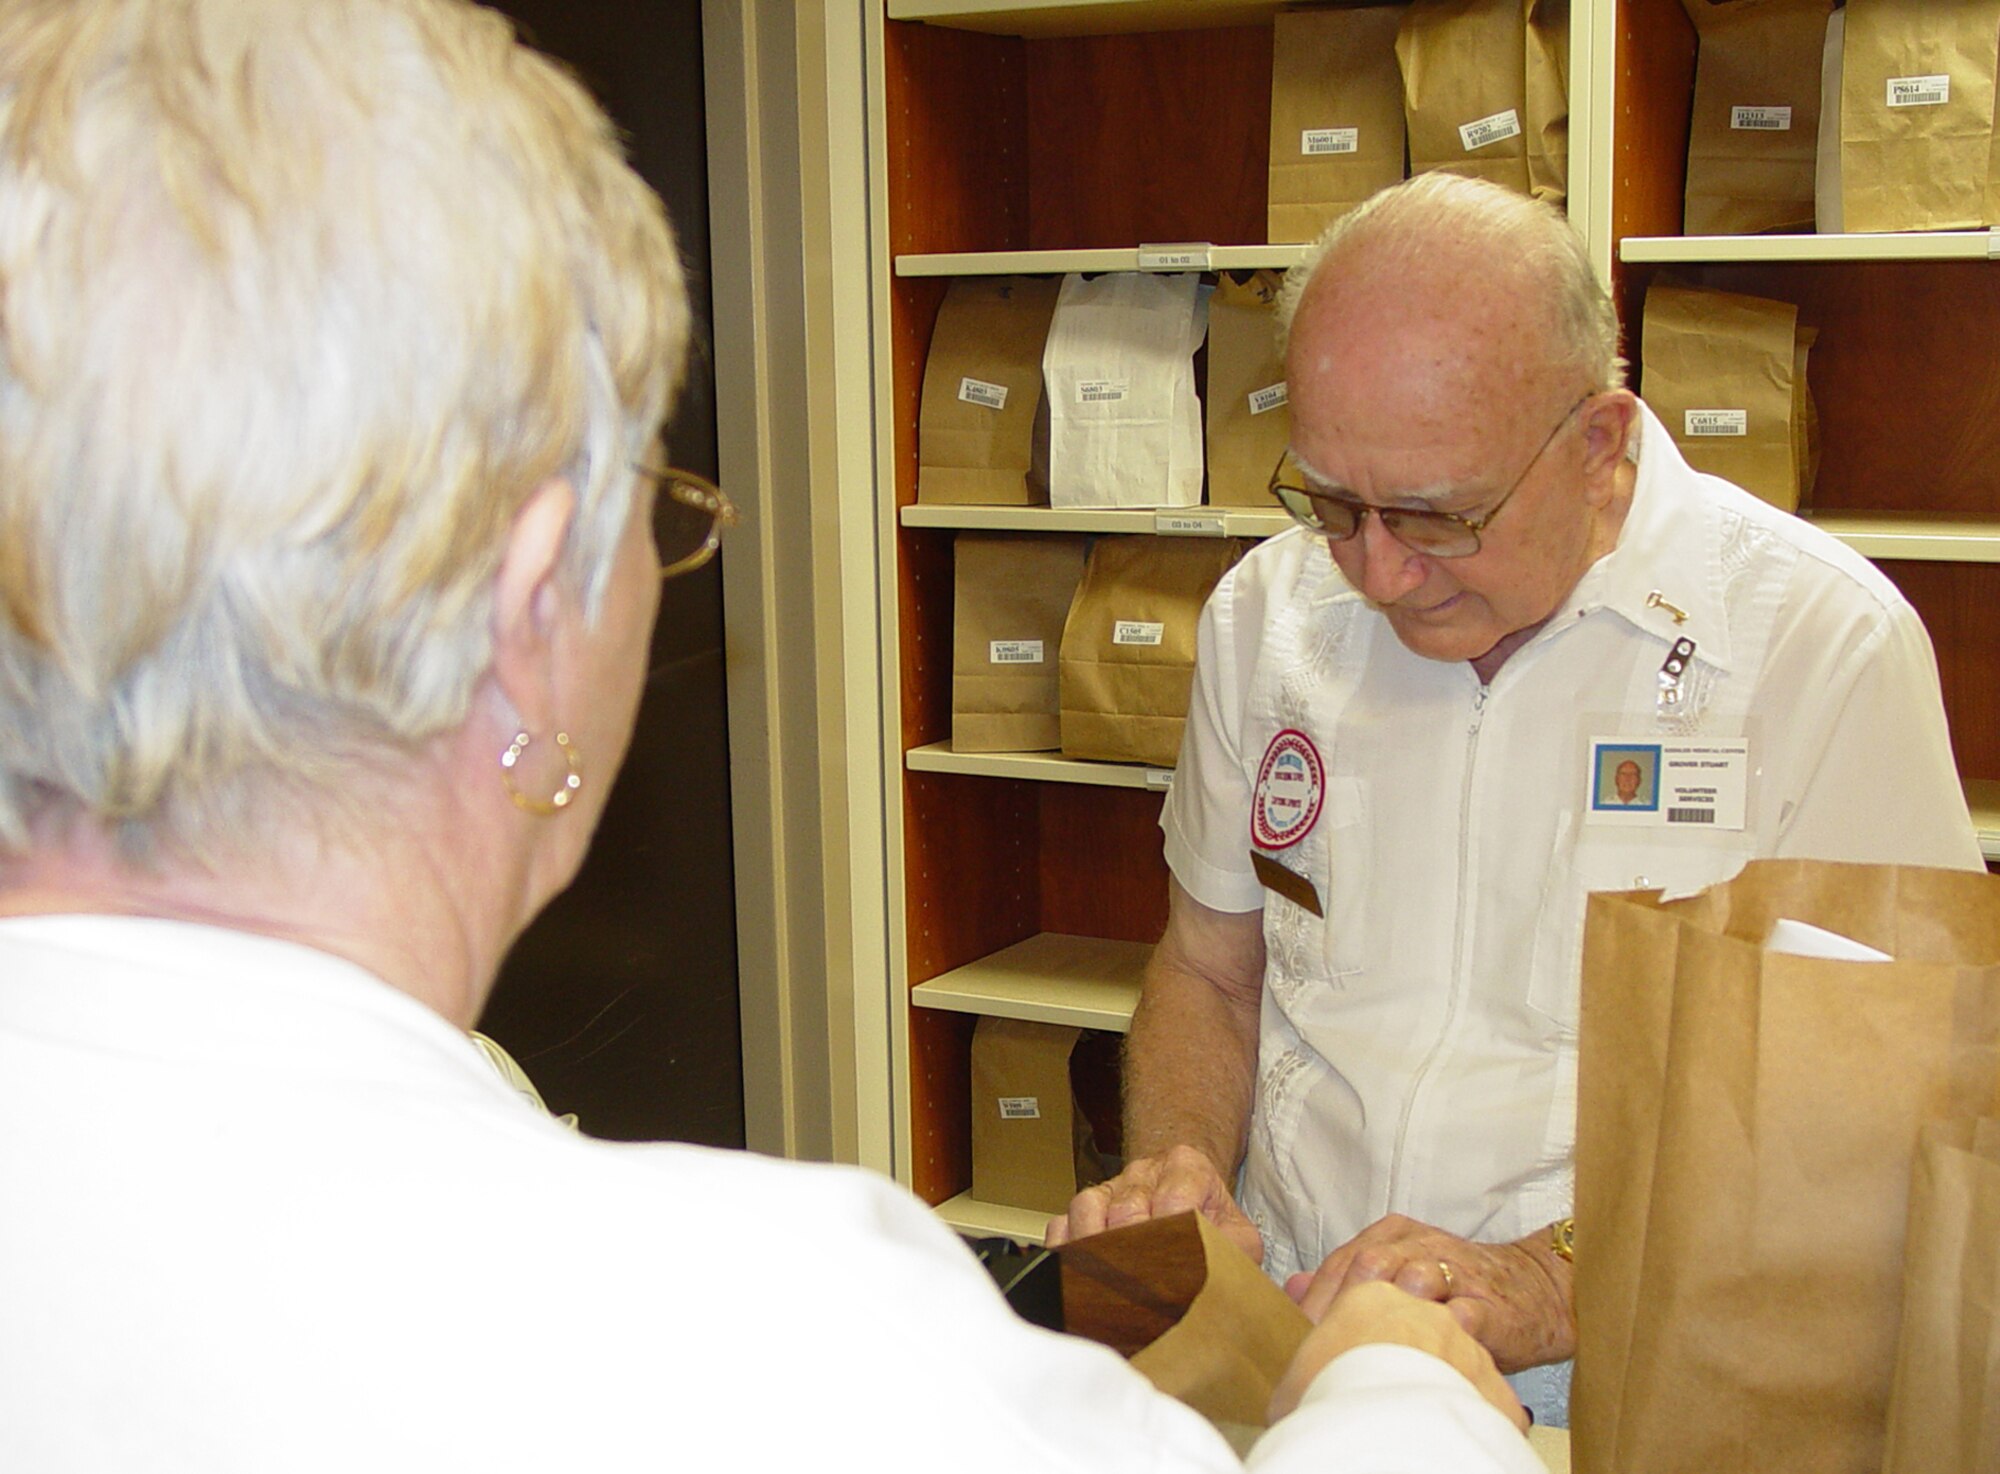 Keesler Medical Center volunteer Grover Stuart hands a prescription to a patient in the main pharmacy.  Mr. Stuart, a retired senior master sergeant, has been providing assistance in the facility for 15 years.  He’s one of approximately 70 people serving as medical center volunteers.   Emily Shelton, volunteer supervisor, said this is fewer than half the people on the rolls before Hurricane Katrina.  More volunteer help is needed as additional services return to the facility, she noted.  For more information, call Mrs. Shelton, 388-6841 or 669-2263.  (U.S. Air Force photo by Steve Pivnick)